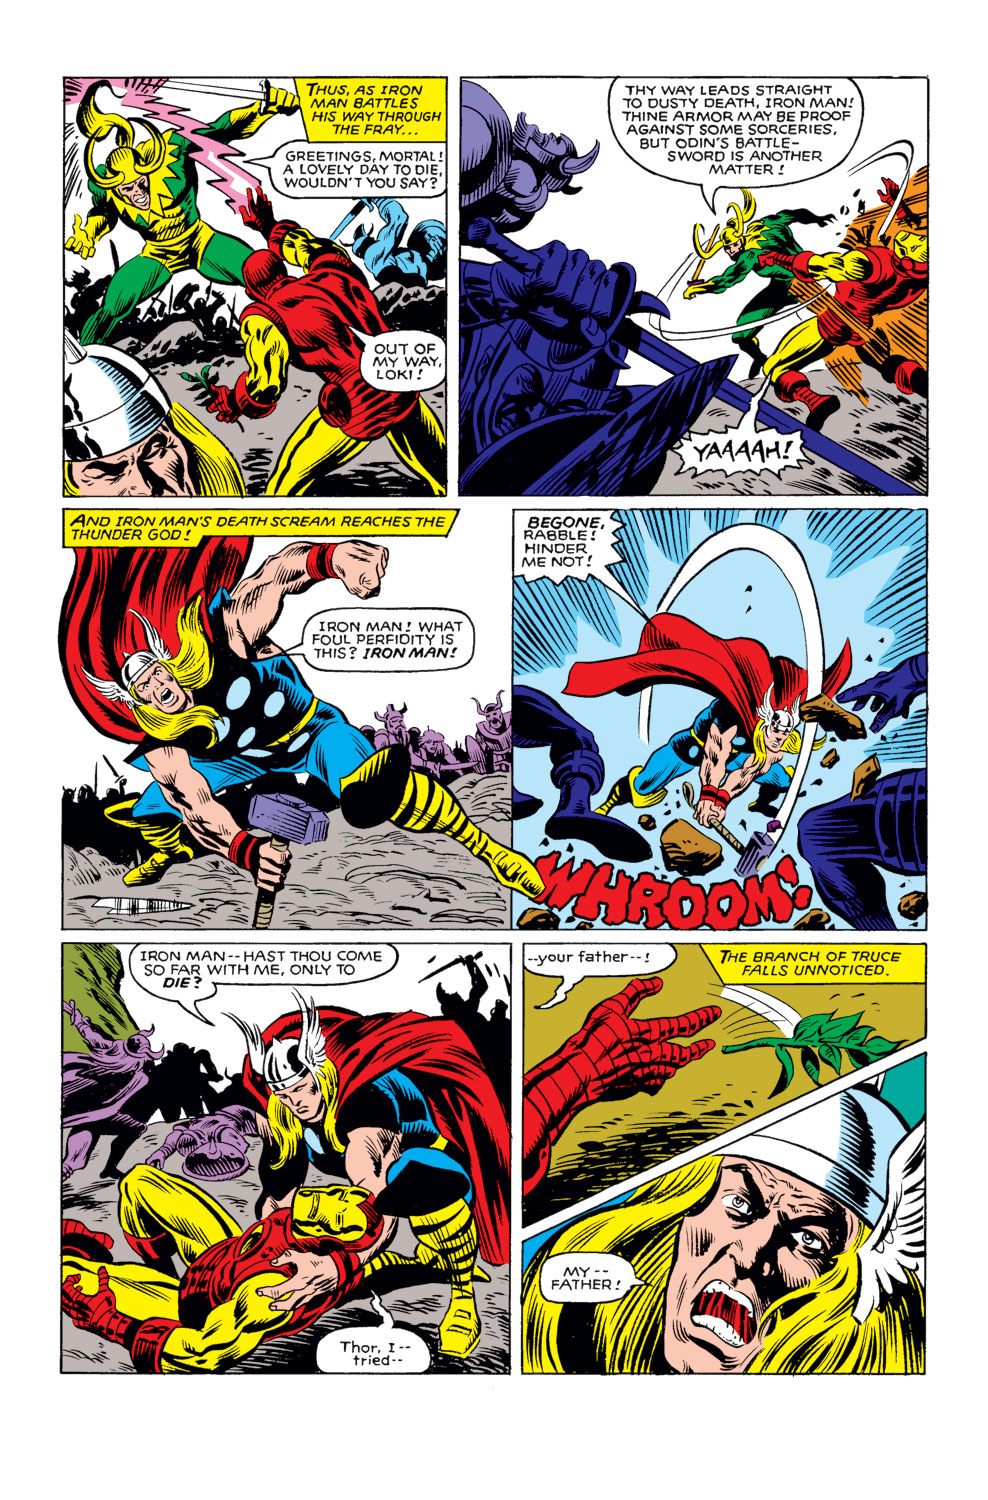 What If? (1977) issue 25 - Thor and the Avengers battled the gods - Page 22